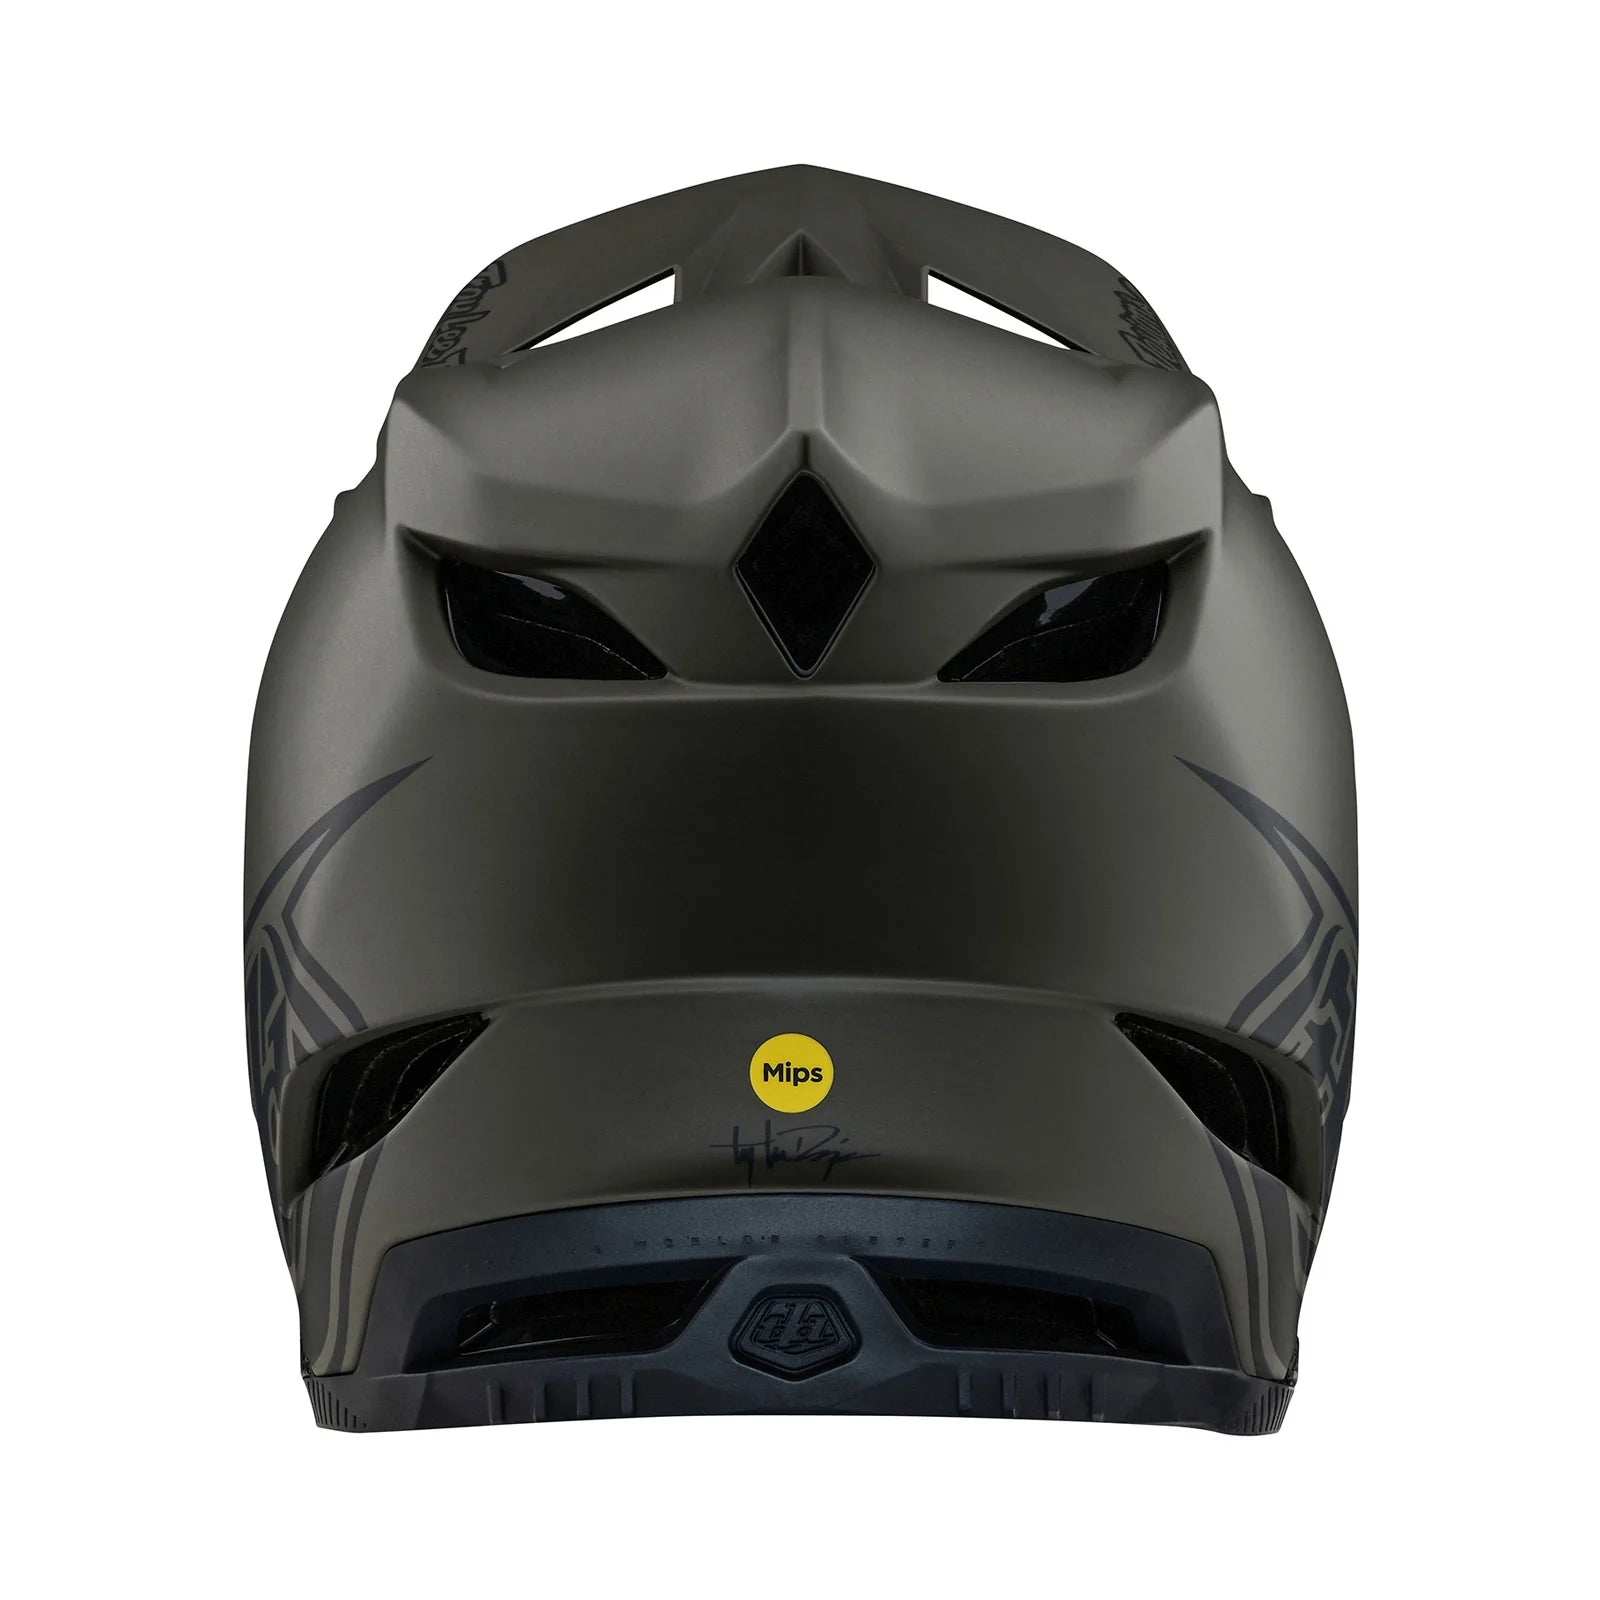 The front view of a TLD D4 AS Composite Helmet W/MIPS Stealth Tarmac with yellow accents and a Mips protection system.